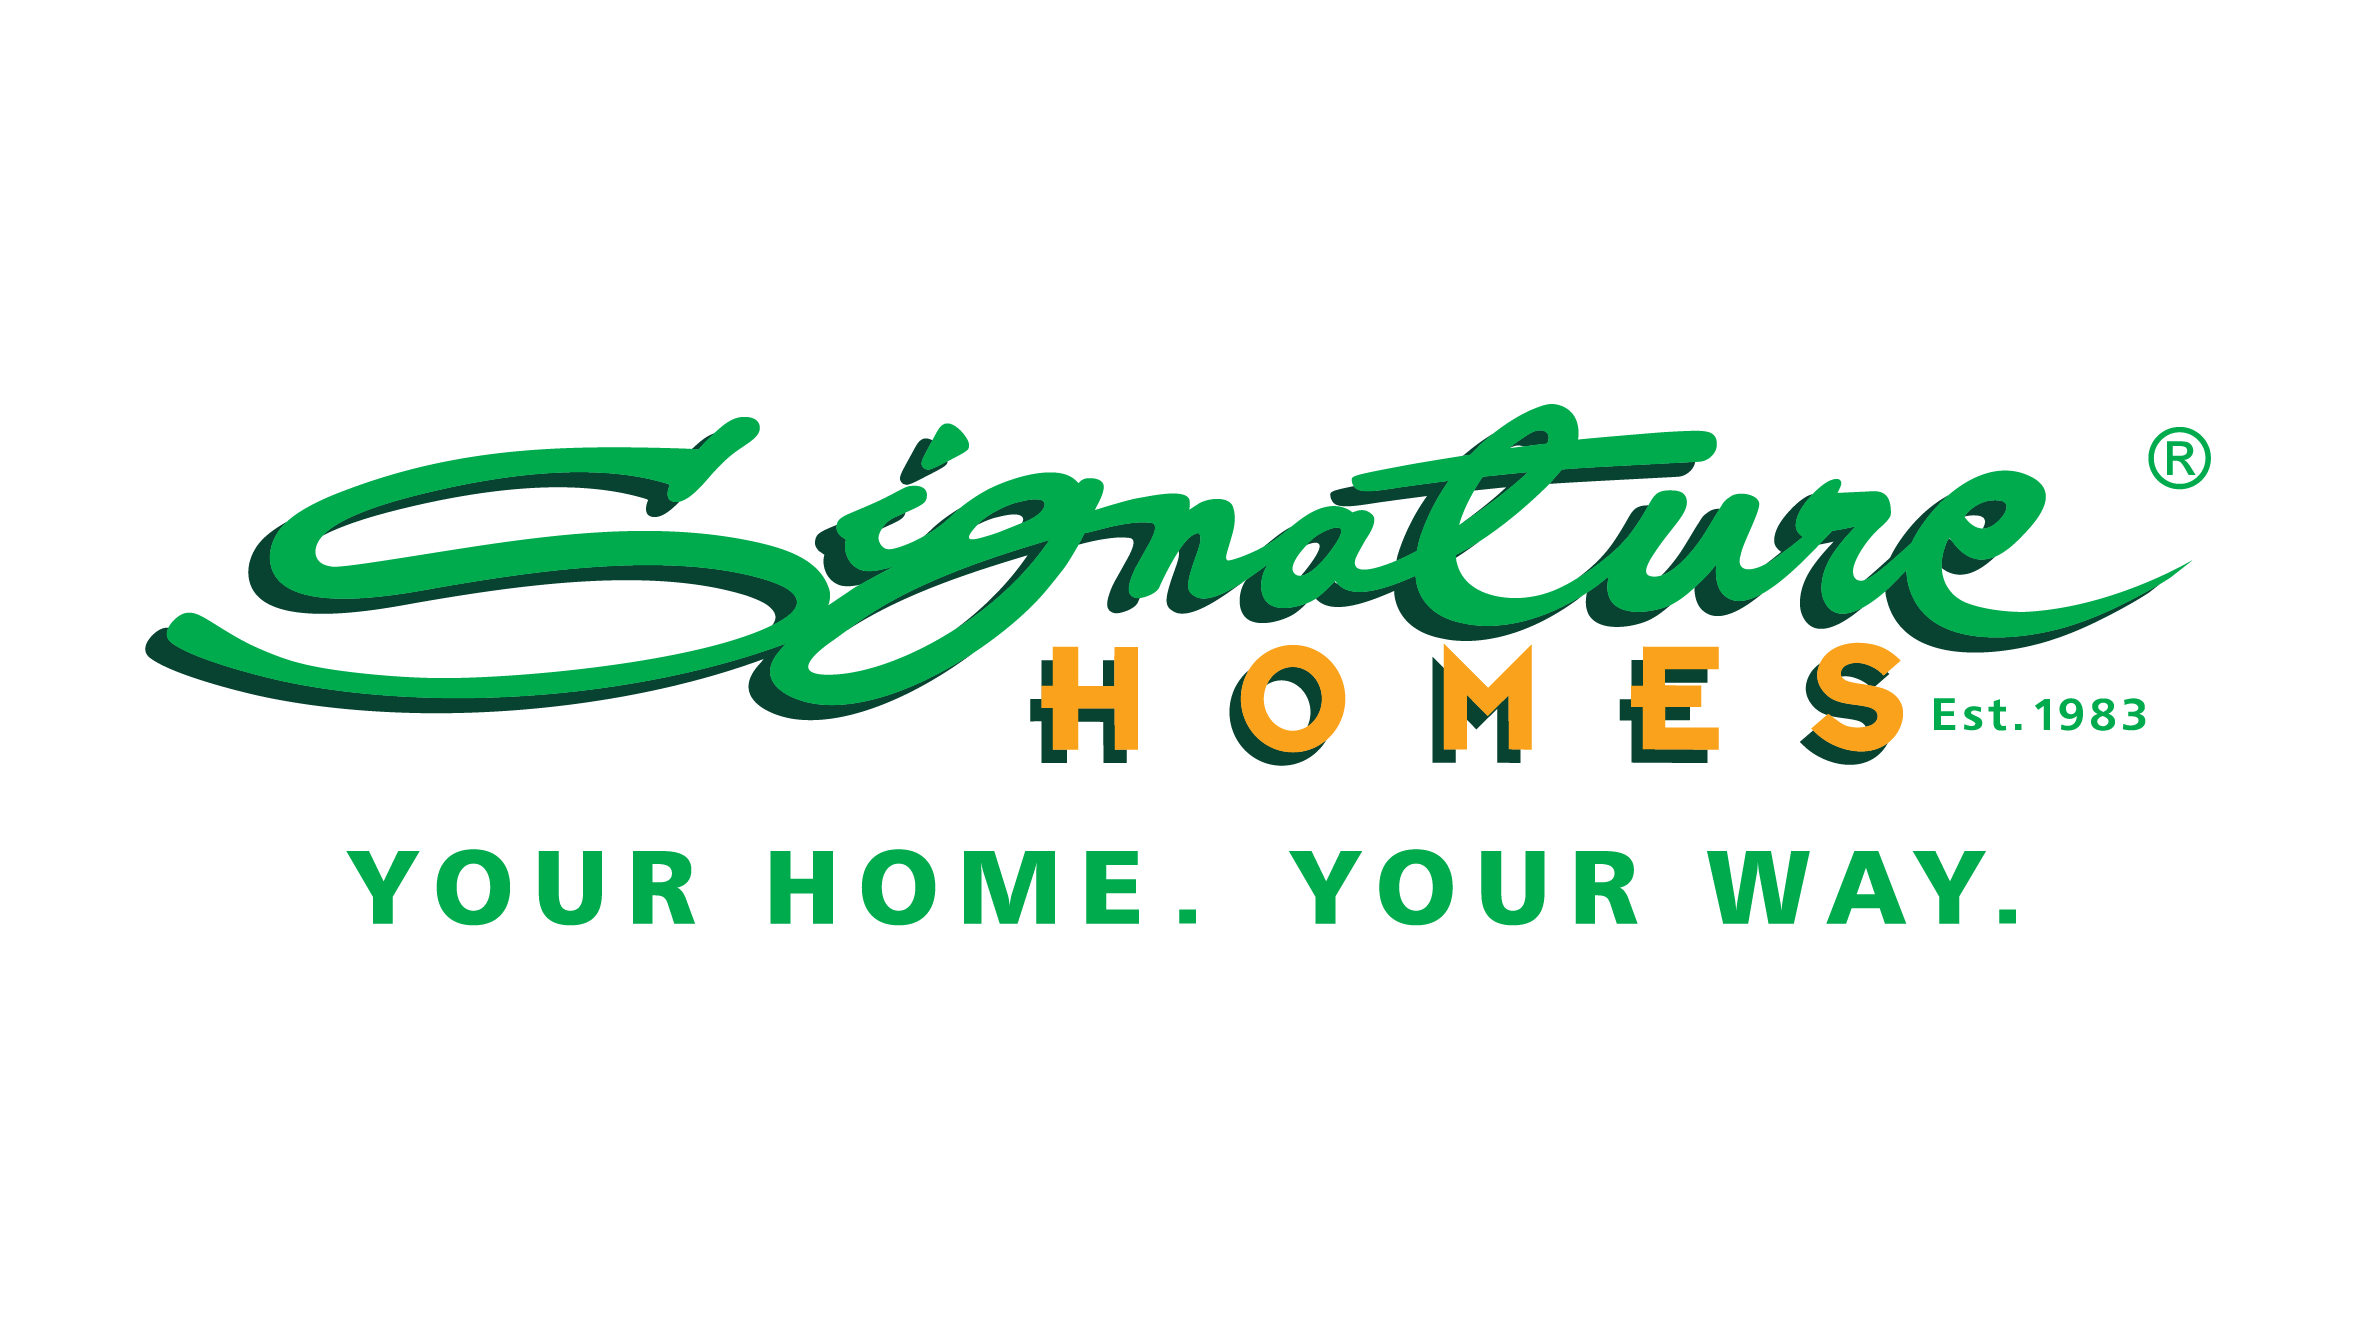 Signature Homes Limited